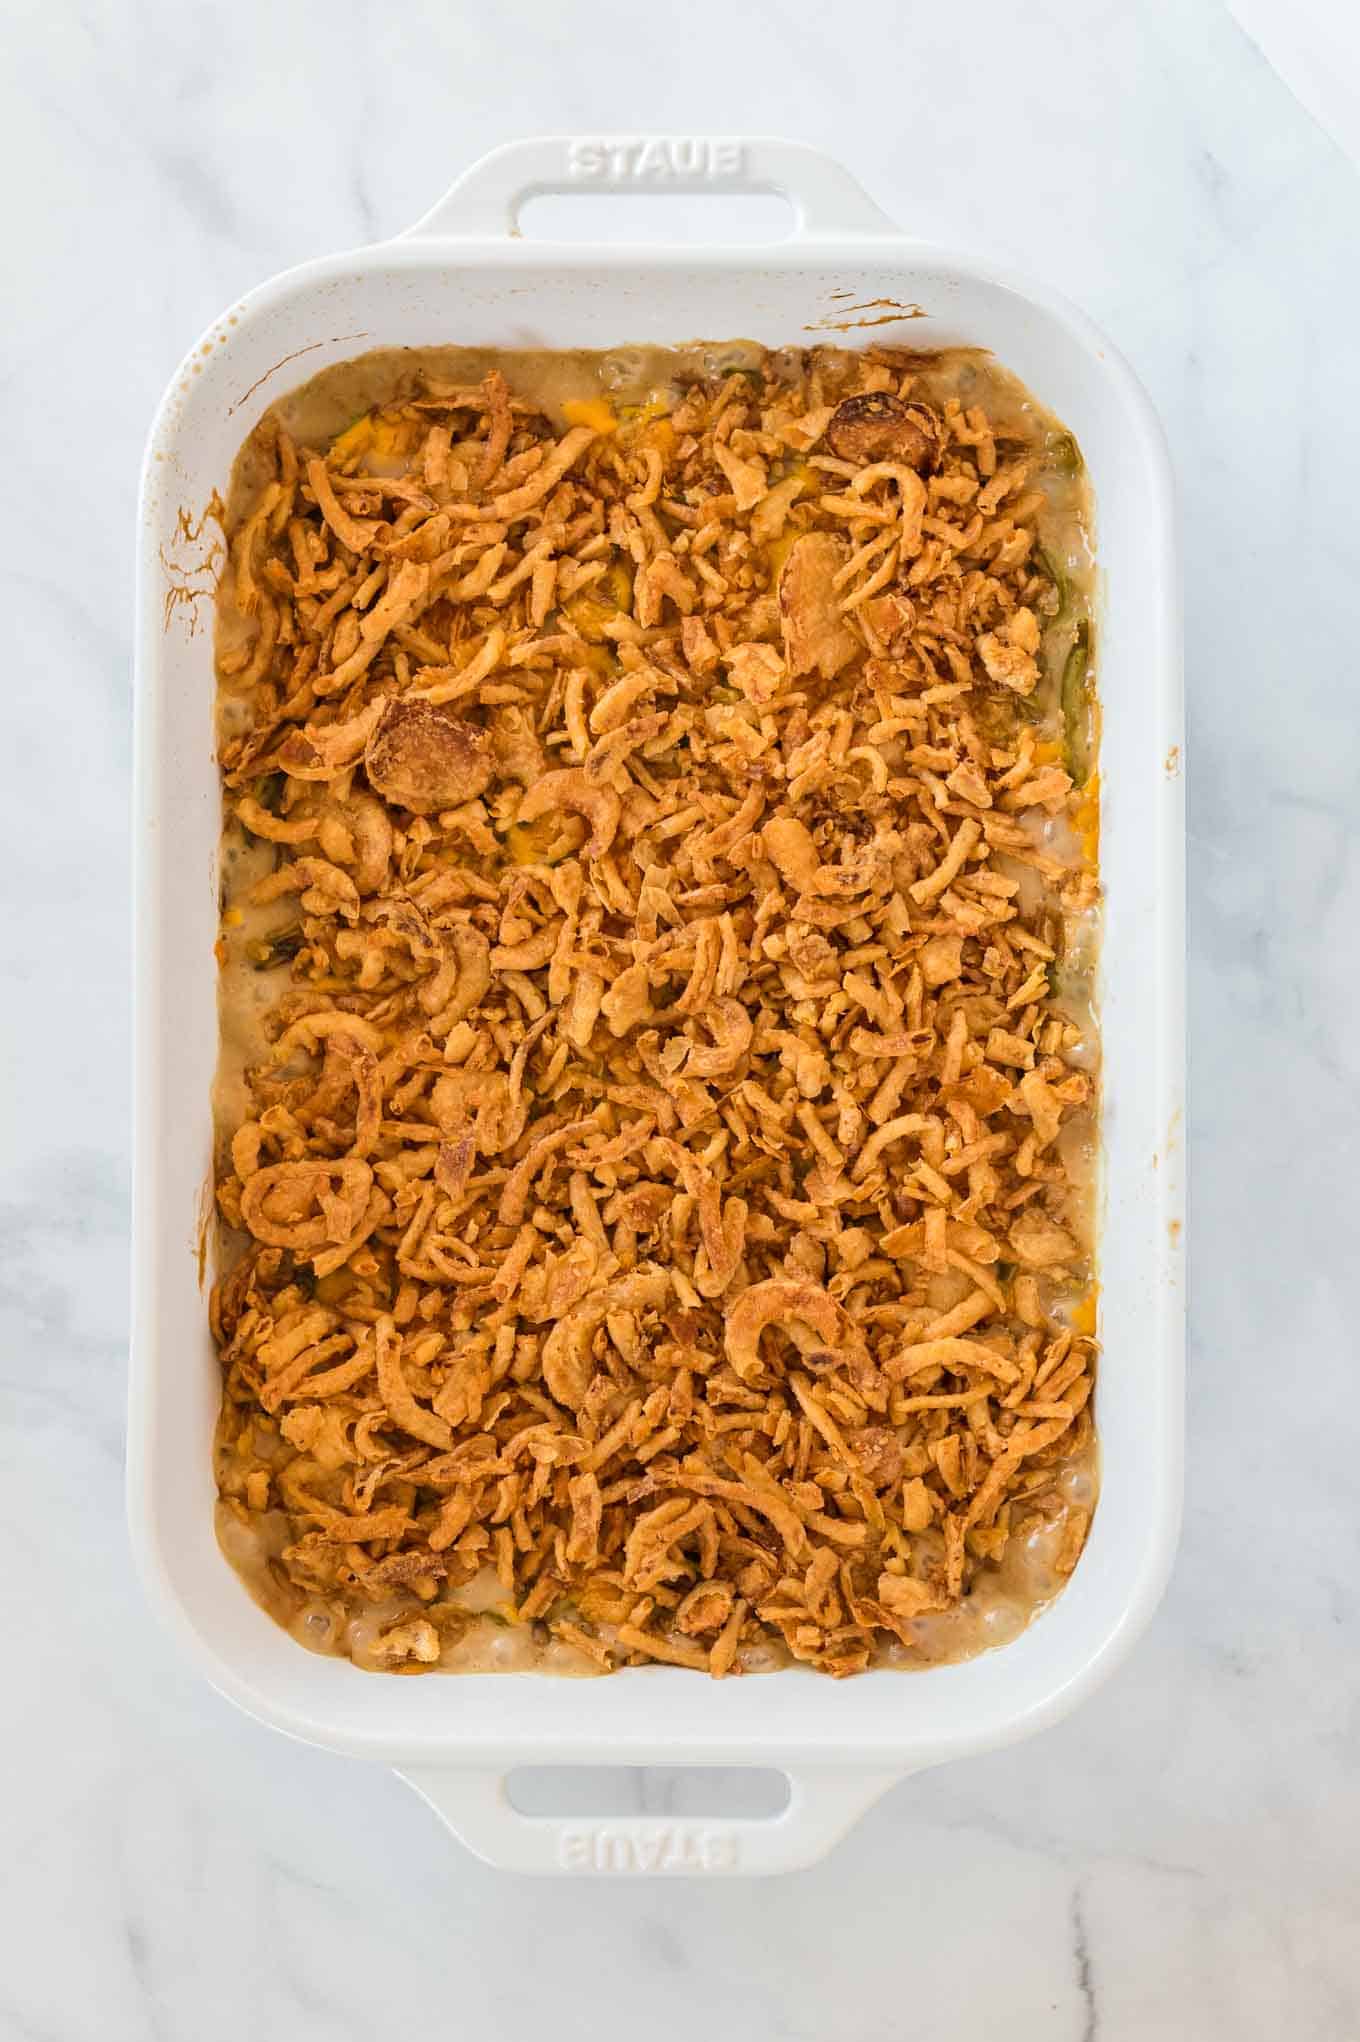 green bean casserole topped with golden french fried onions in a white baking dish